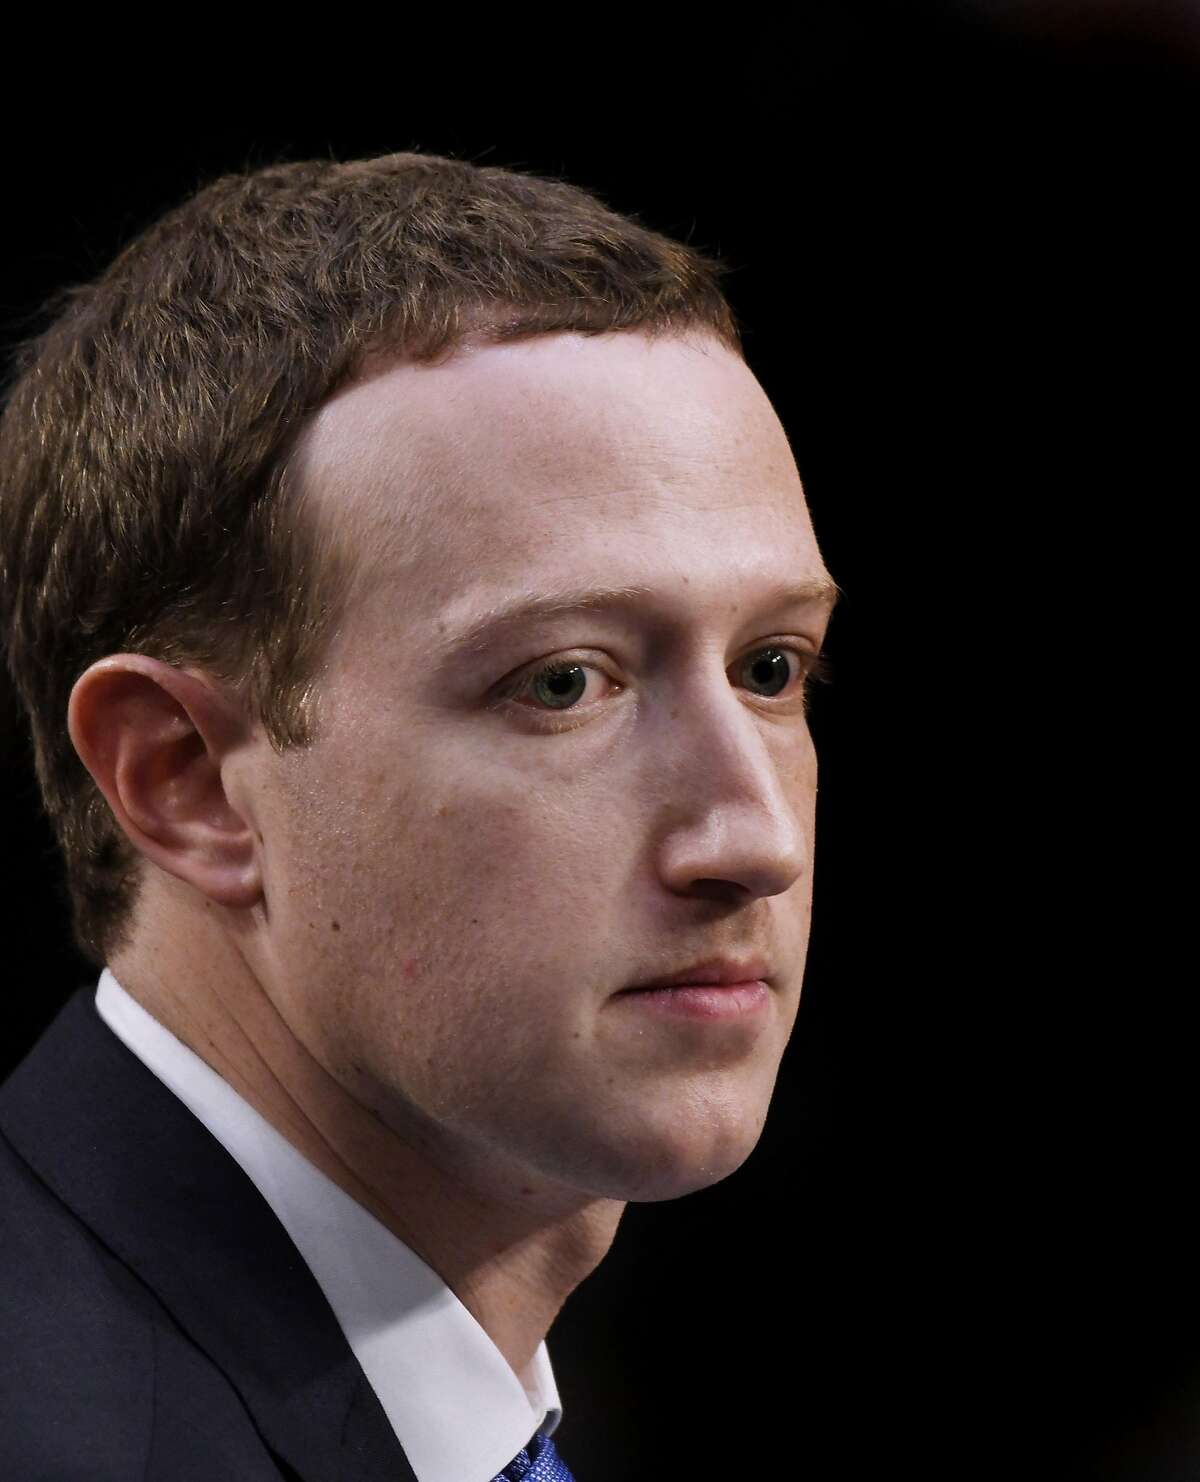 Facebook CEO Mark Zuckerberg testifies before the Senate judiciary and commerce committees on Capitol Hill over social media data breach, on April 10, 2018 in Washington, D.C. The company's stock plummeted Thursday after the company warned growth is slowing. (Olivier Douliery/Abaca Press/TNS)